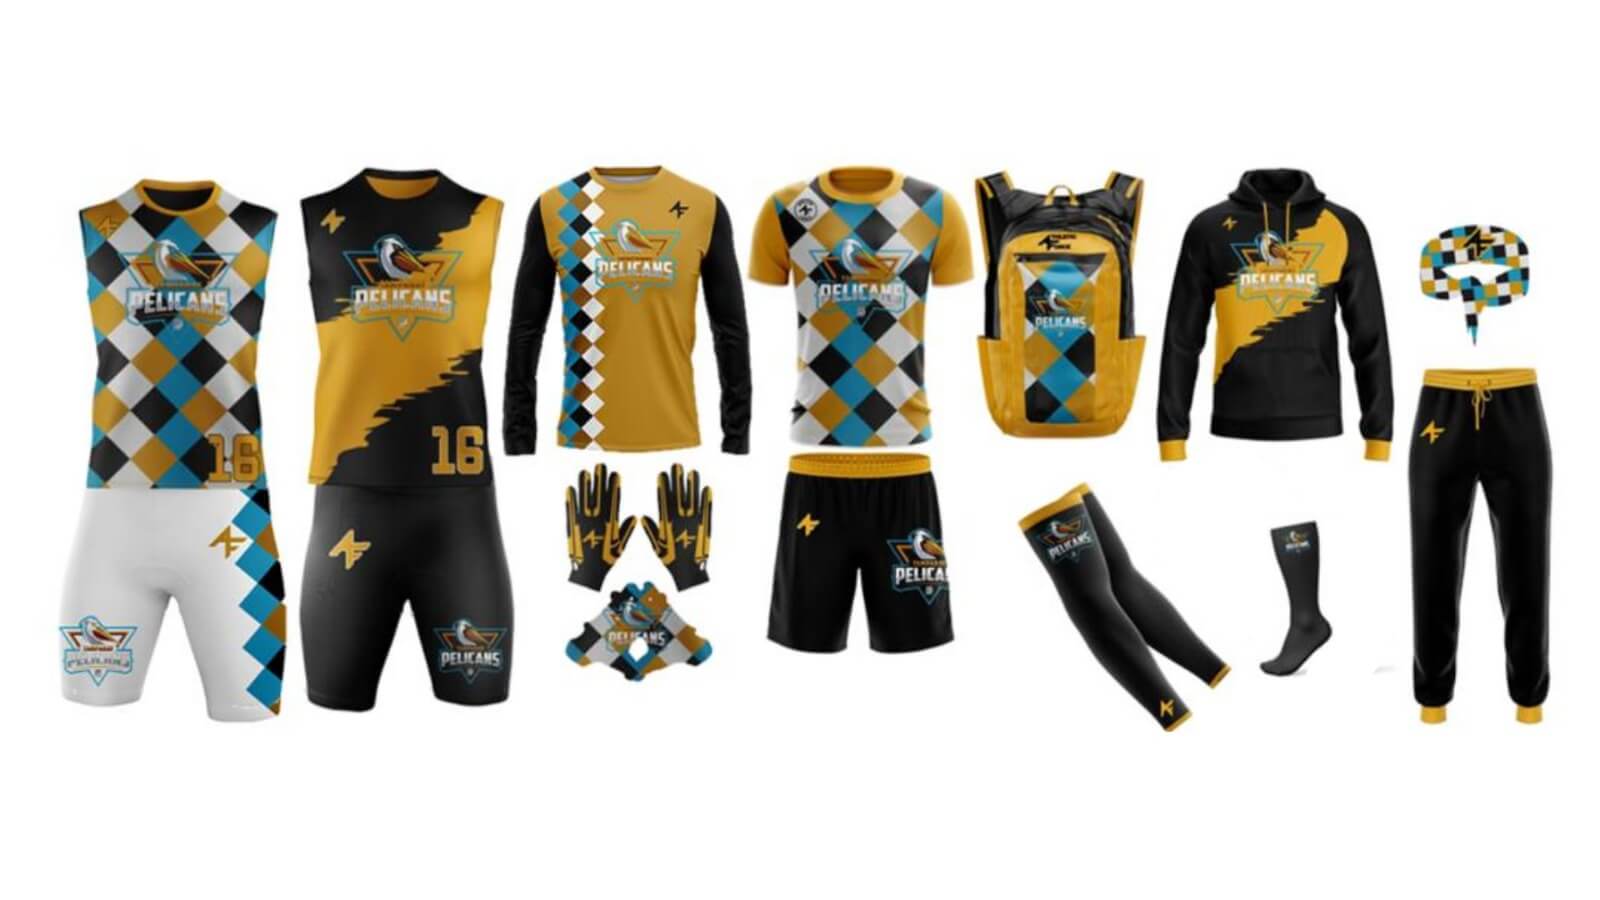 7V7 Flag Football Ultra Performance Compression Uniform and Complete Package.